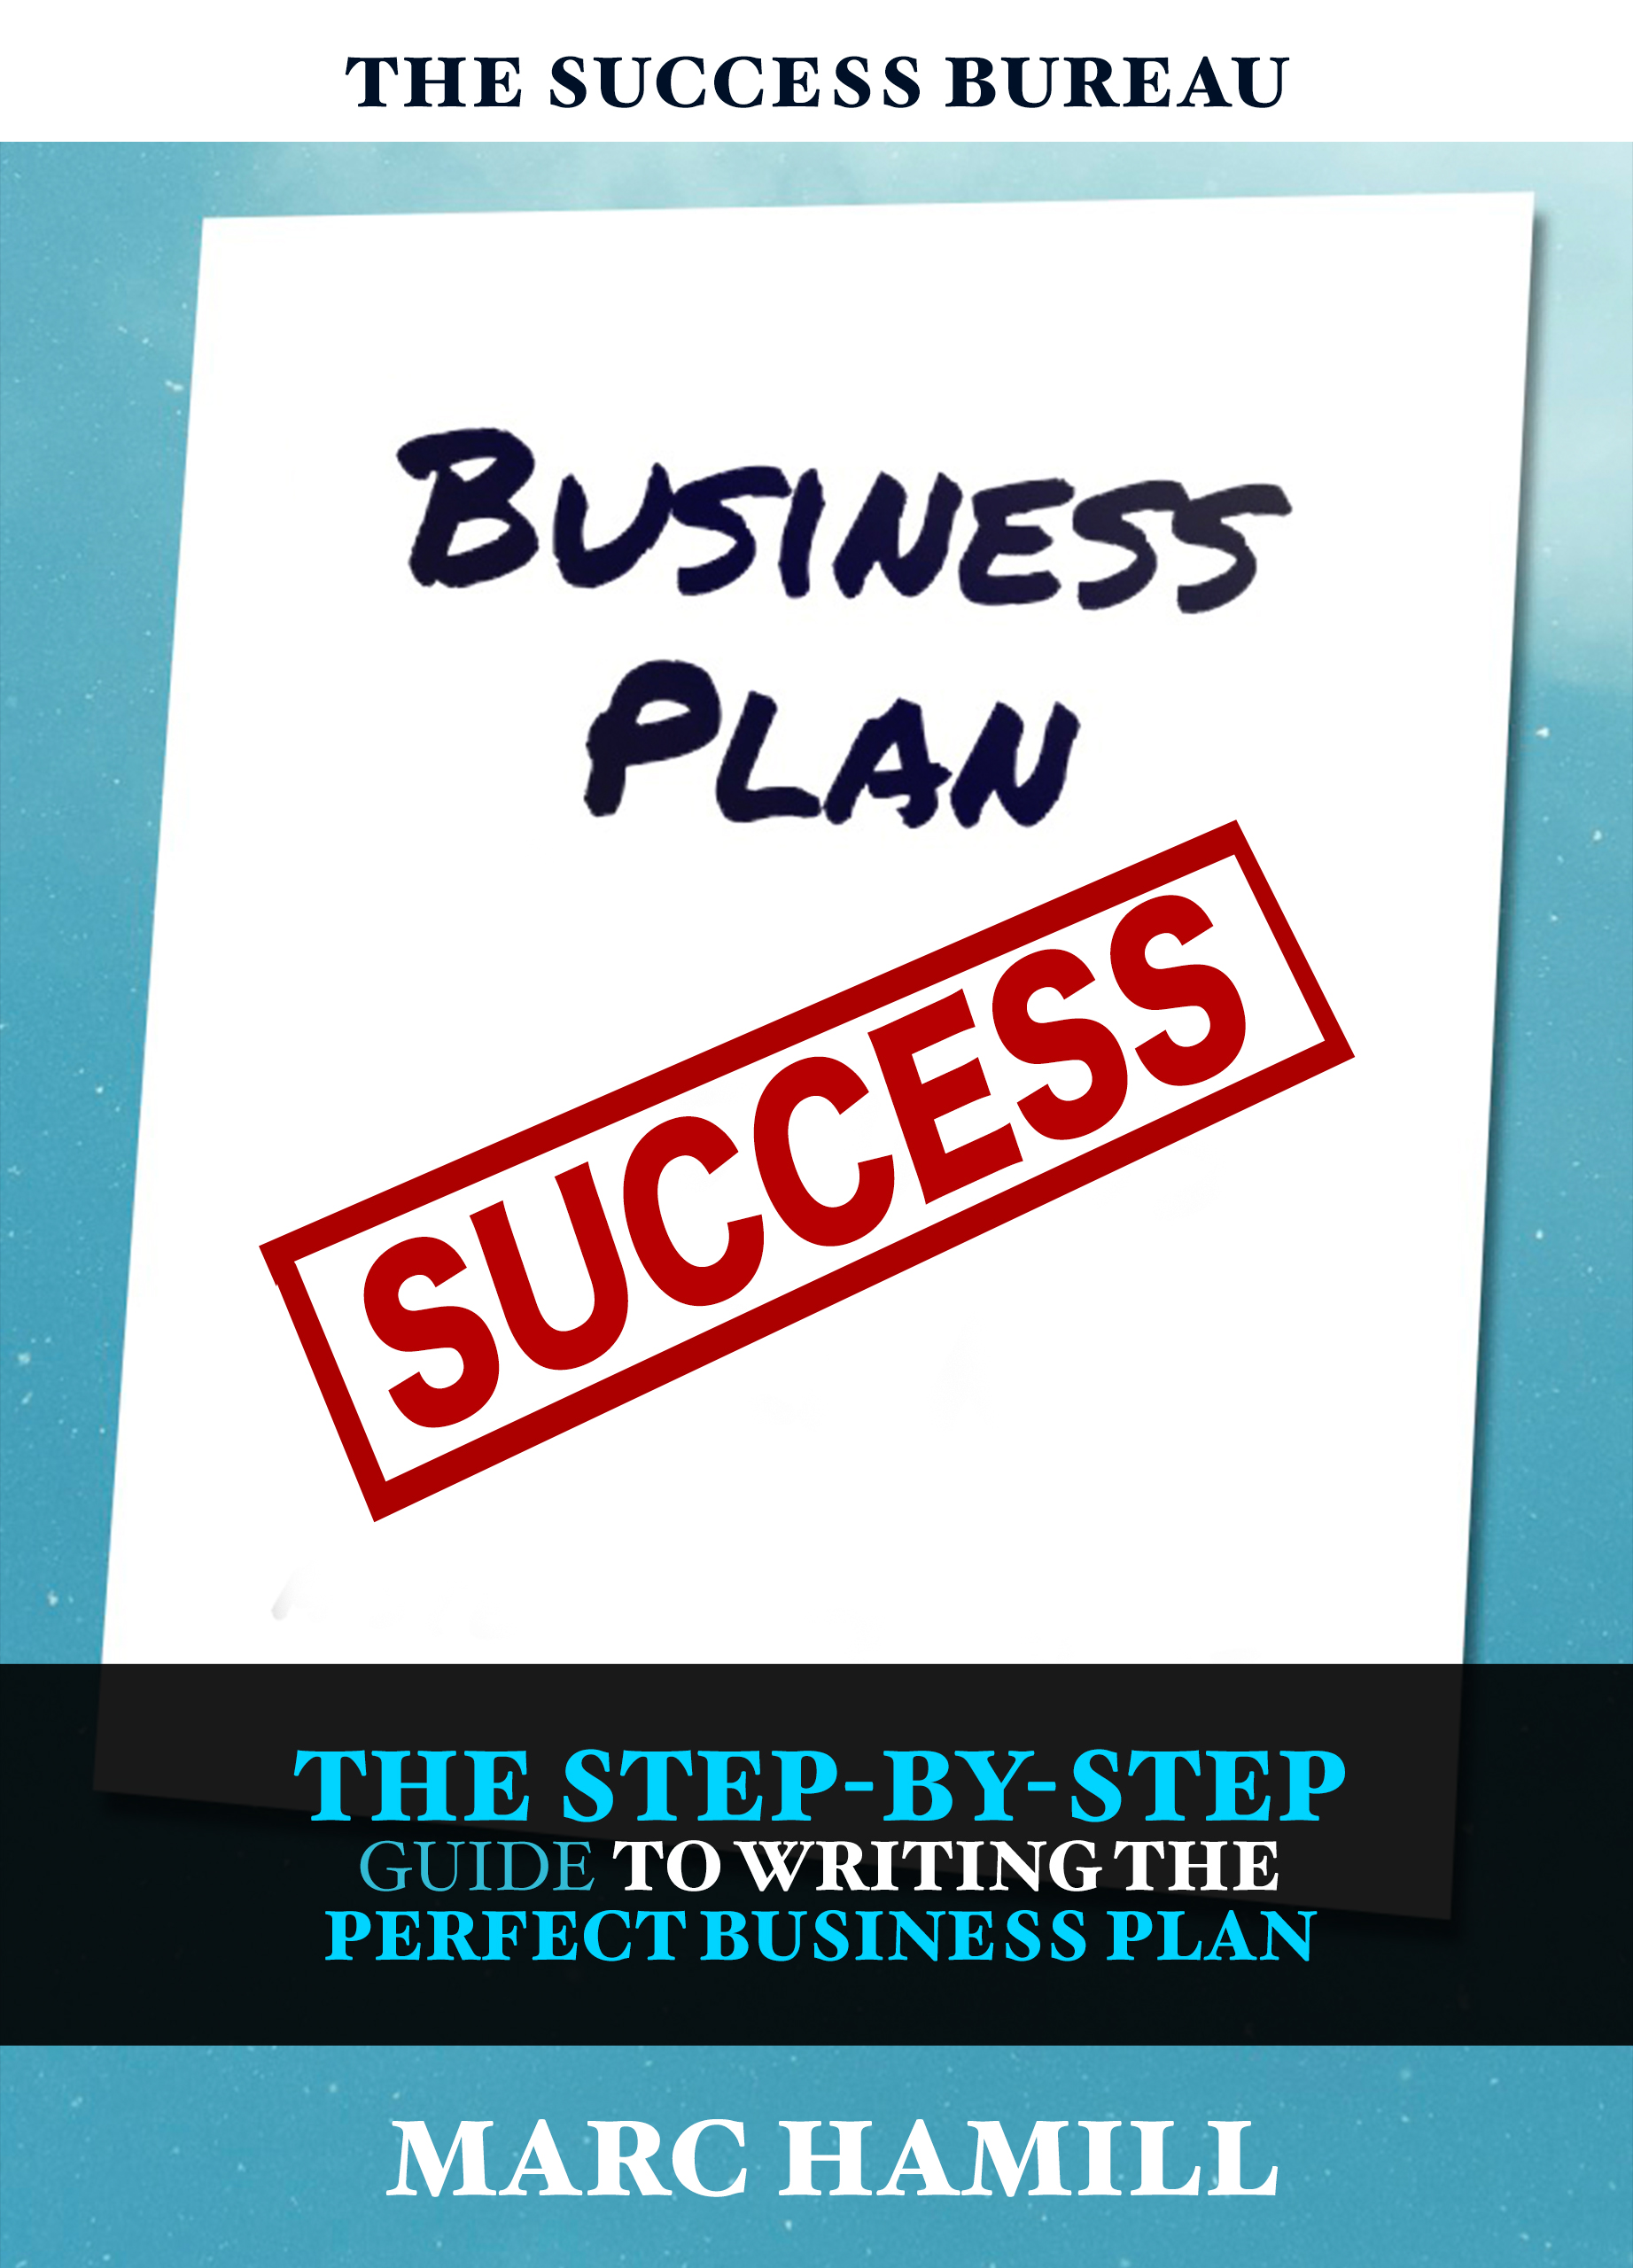 my business plan for success